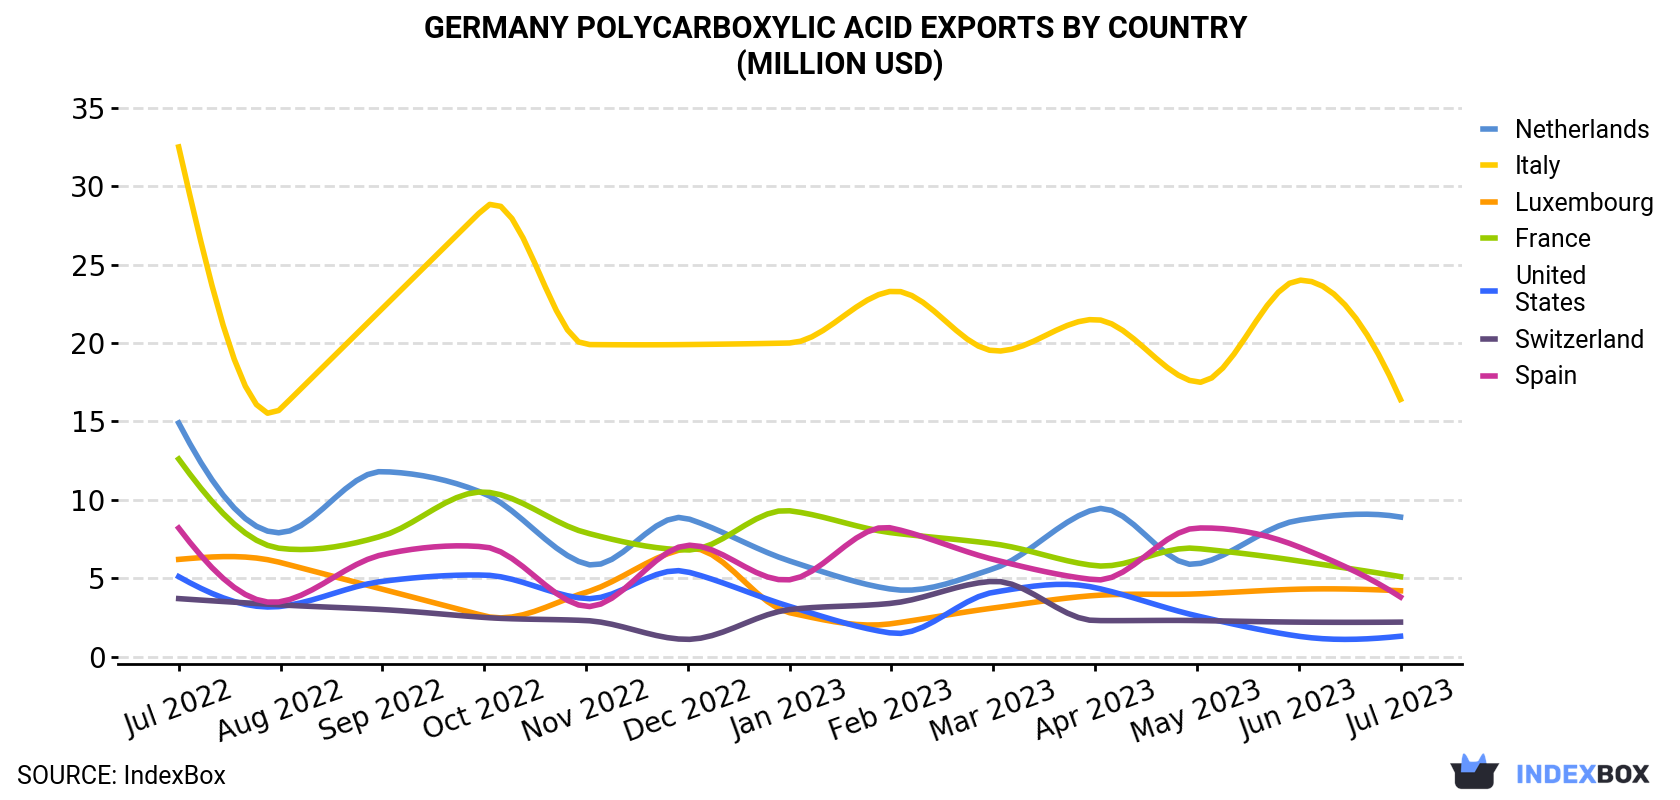 Germany Polycarboxylic Acid Exports By Country (Million USD)